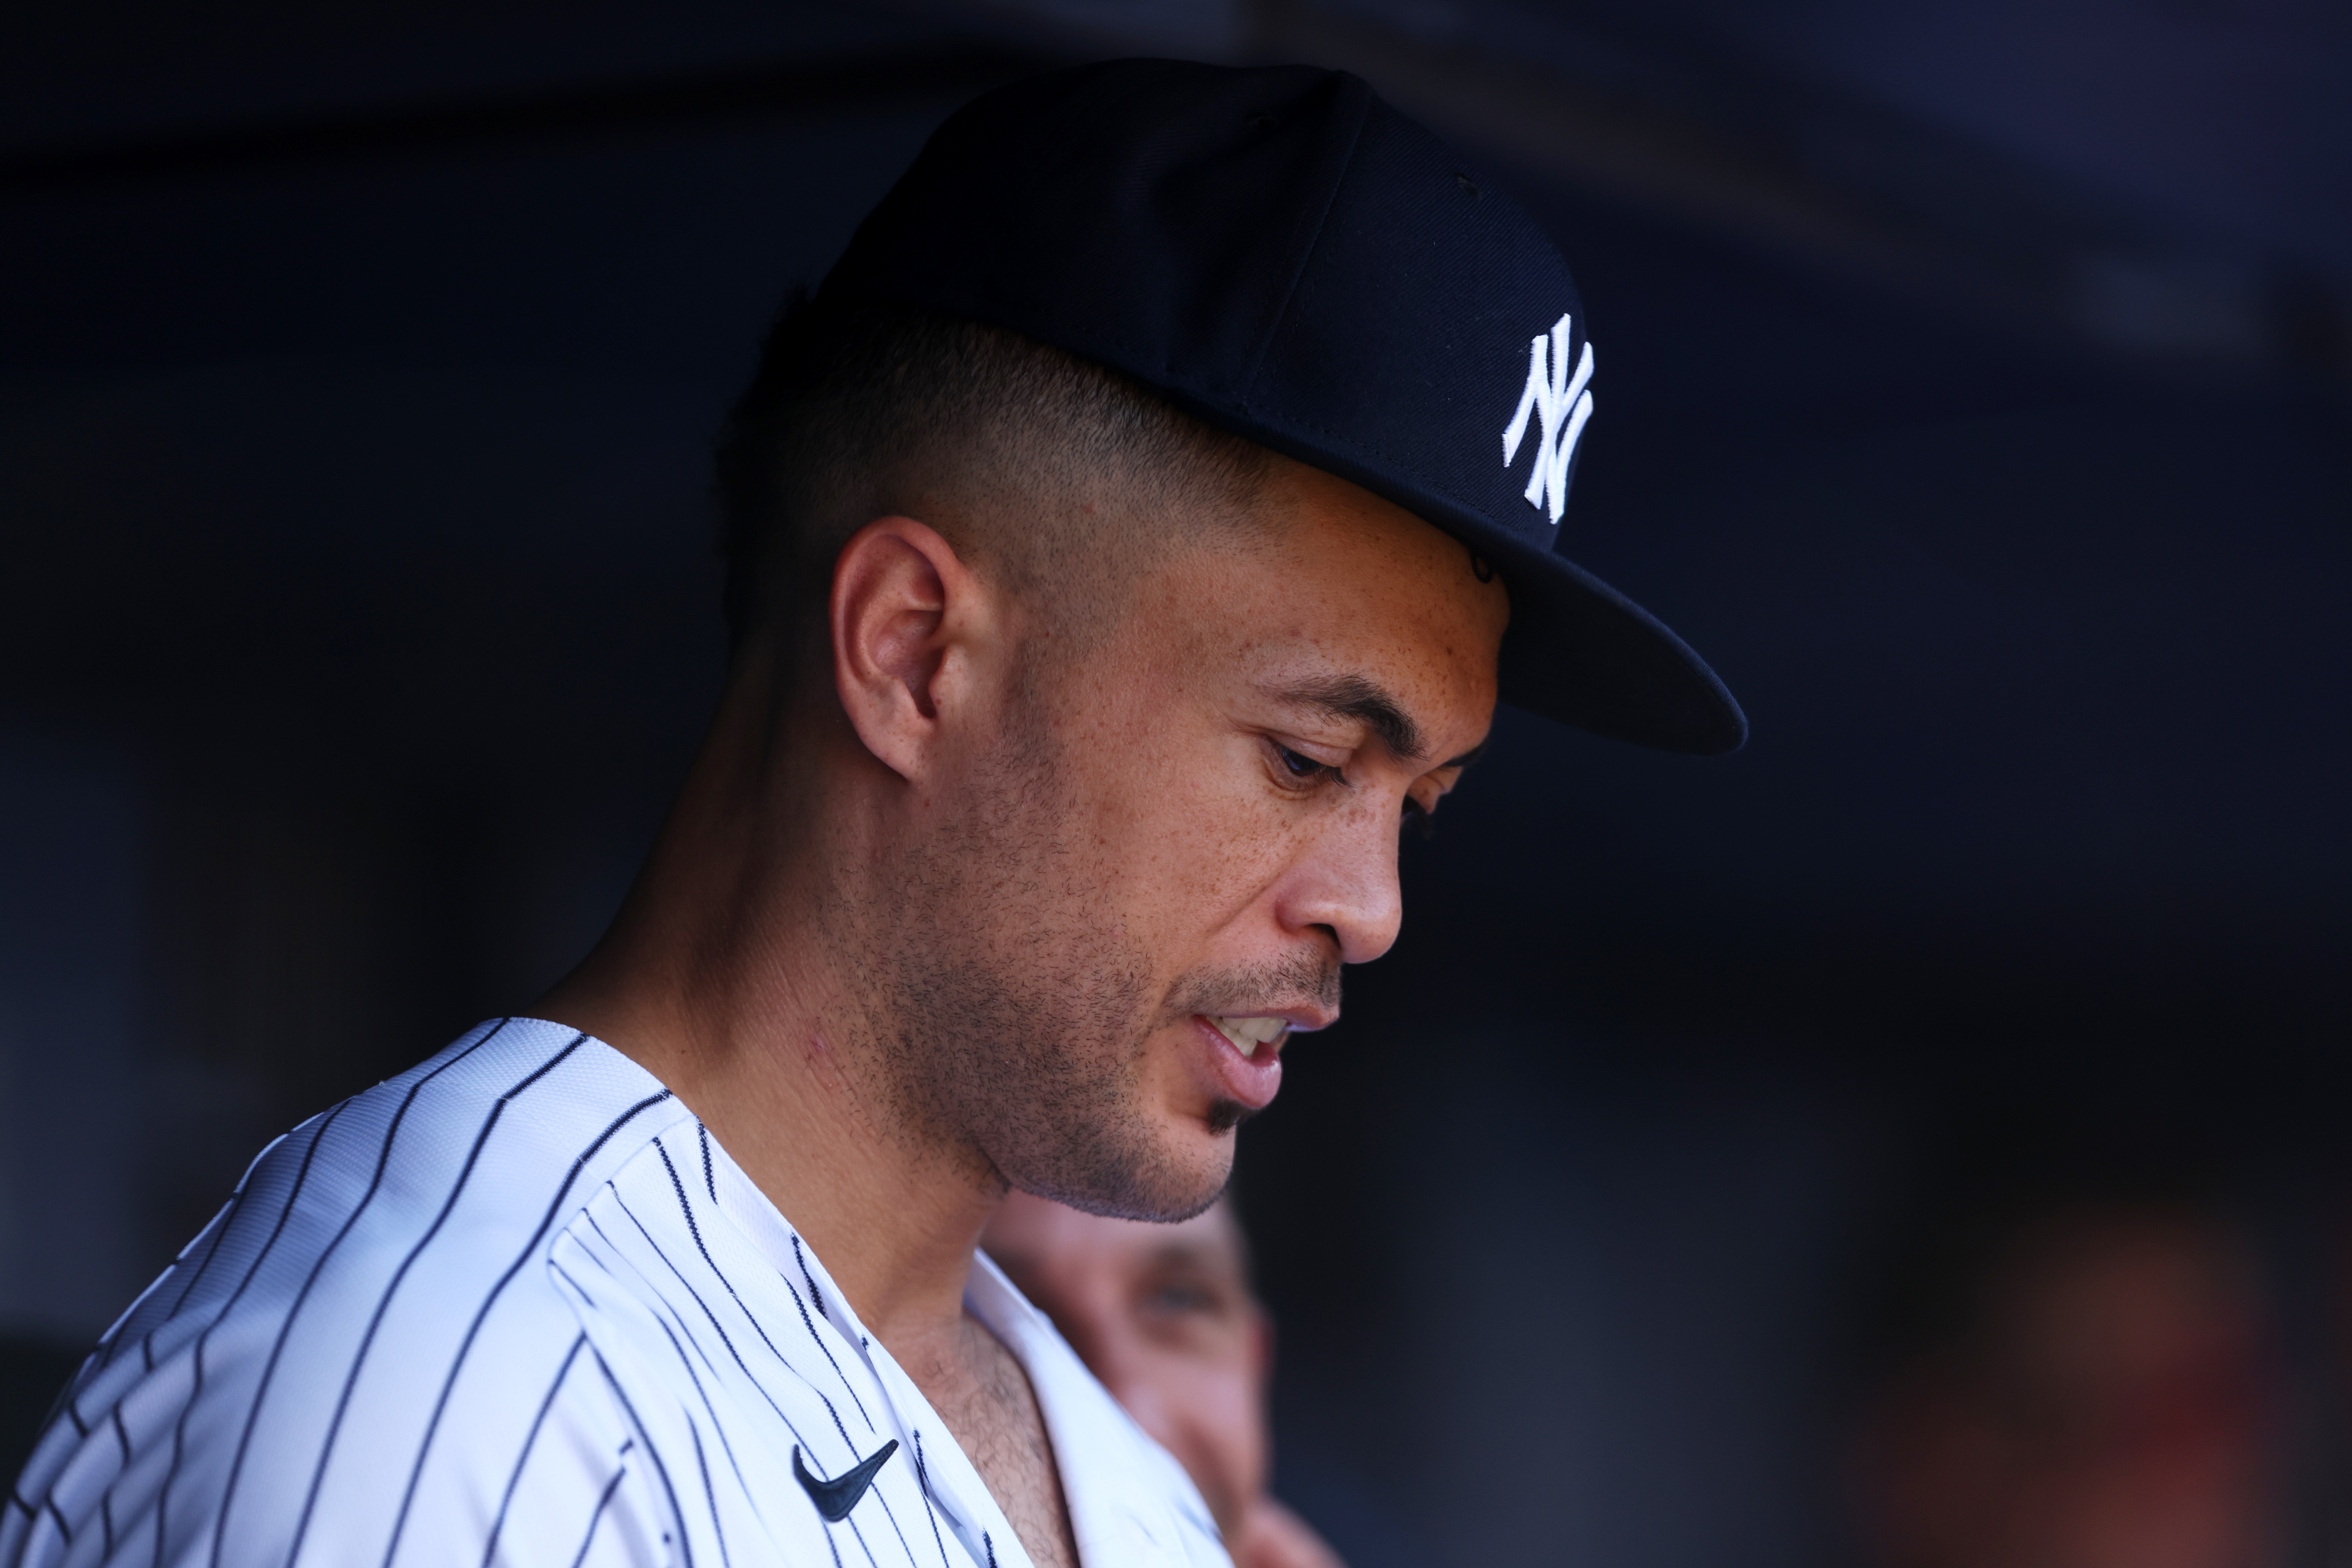 Giancarlo Stanton #27 of the New York Yankees watches from the dugout during a game against the Kansas City Royals at Yankee Stadium on July 30, 2022 in New York City.